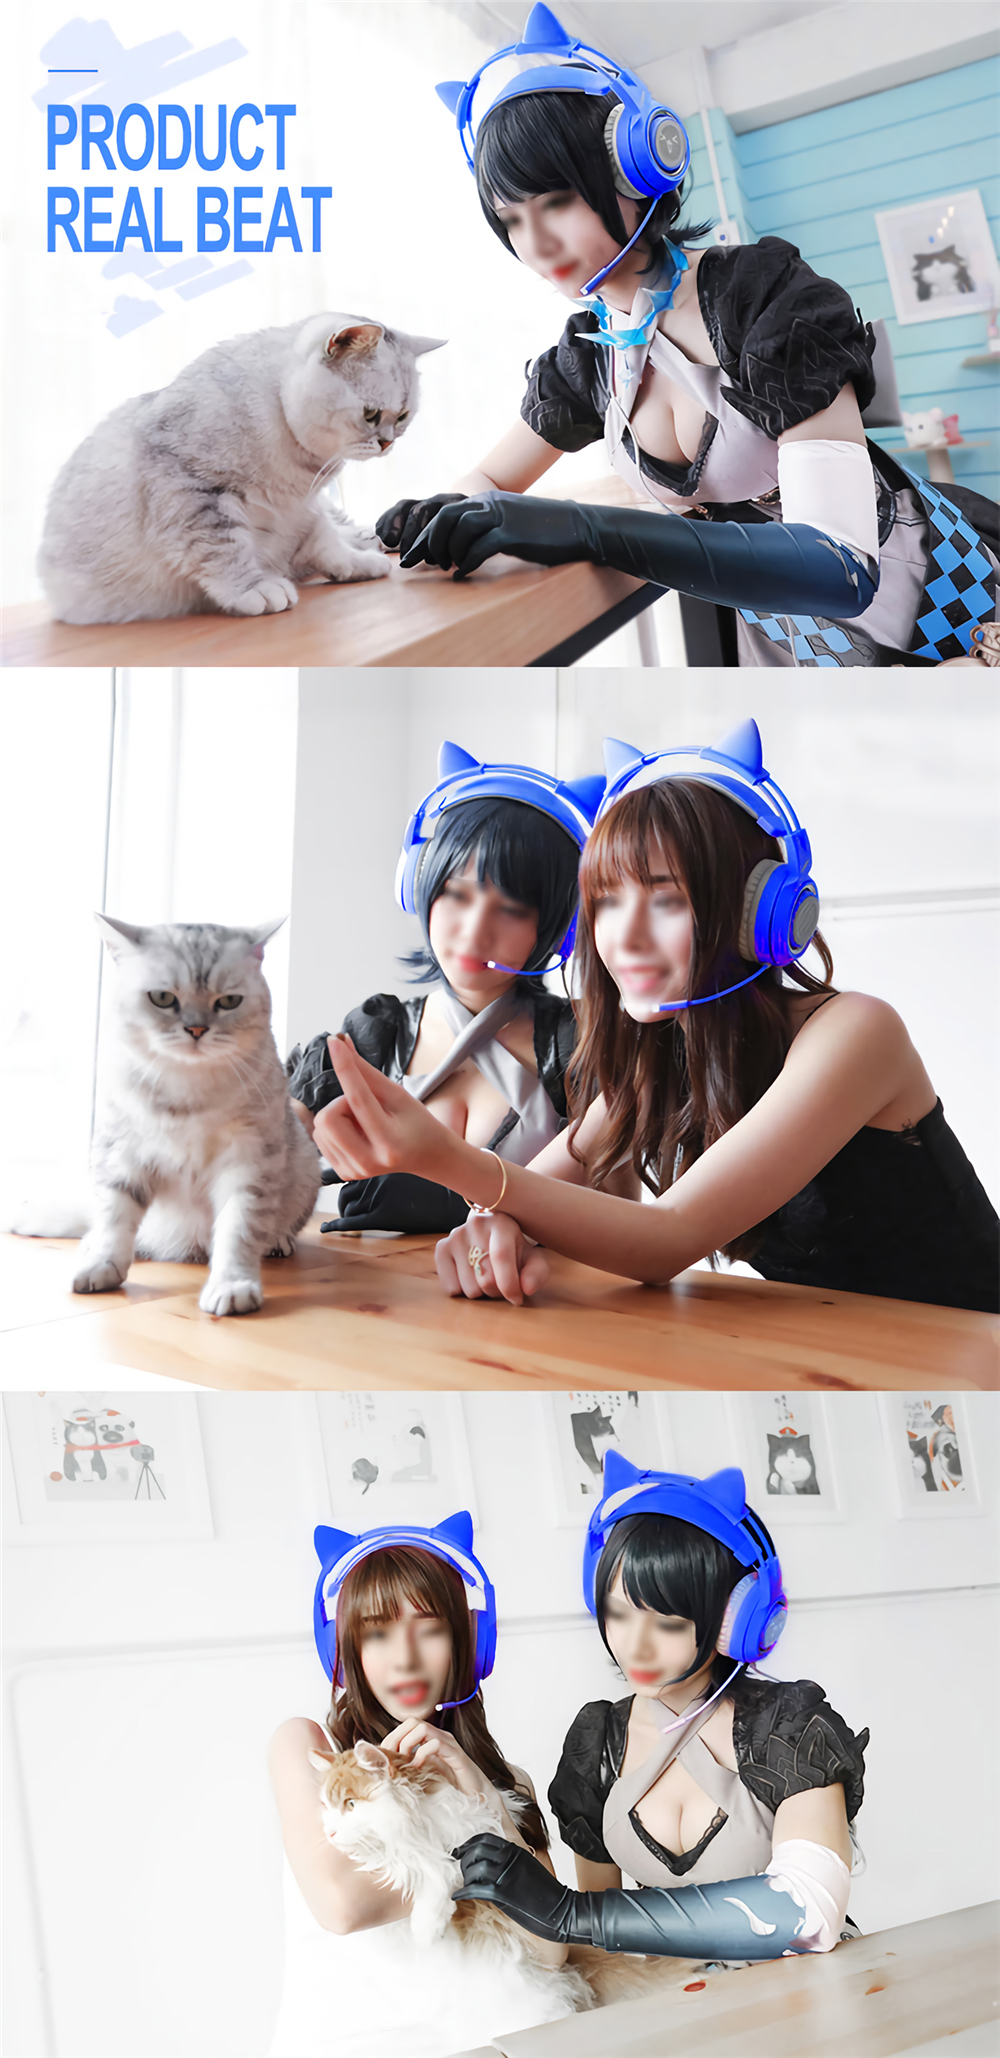 Somic-G952S-Blue-Cute-Gaming-Headset-35mm-Plug-Wired-Stereo-Sound-Headphone-with-Microphone-for-Comp-1725348-9